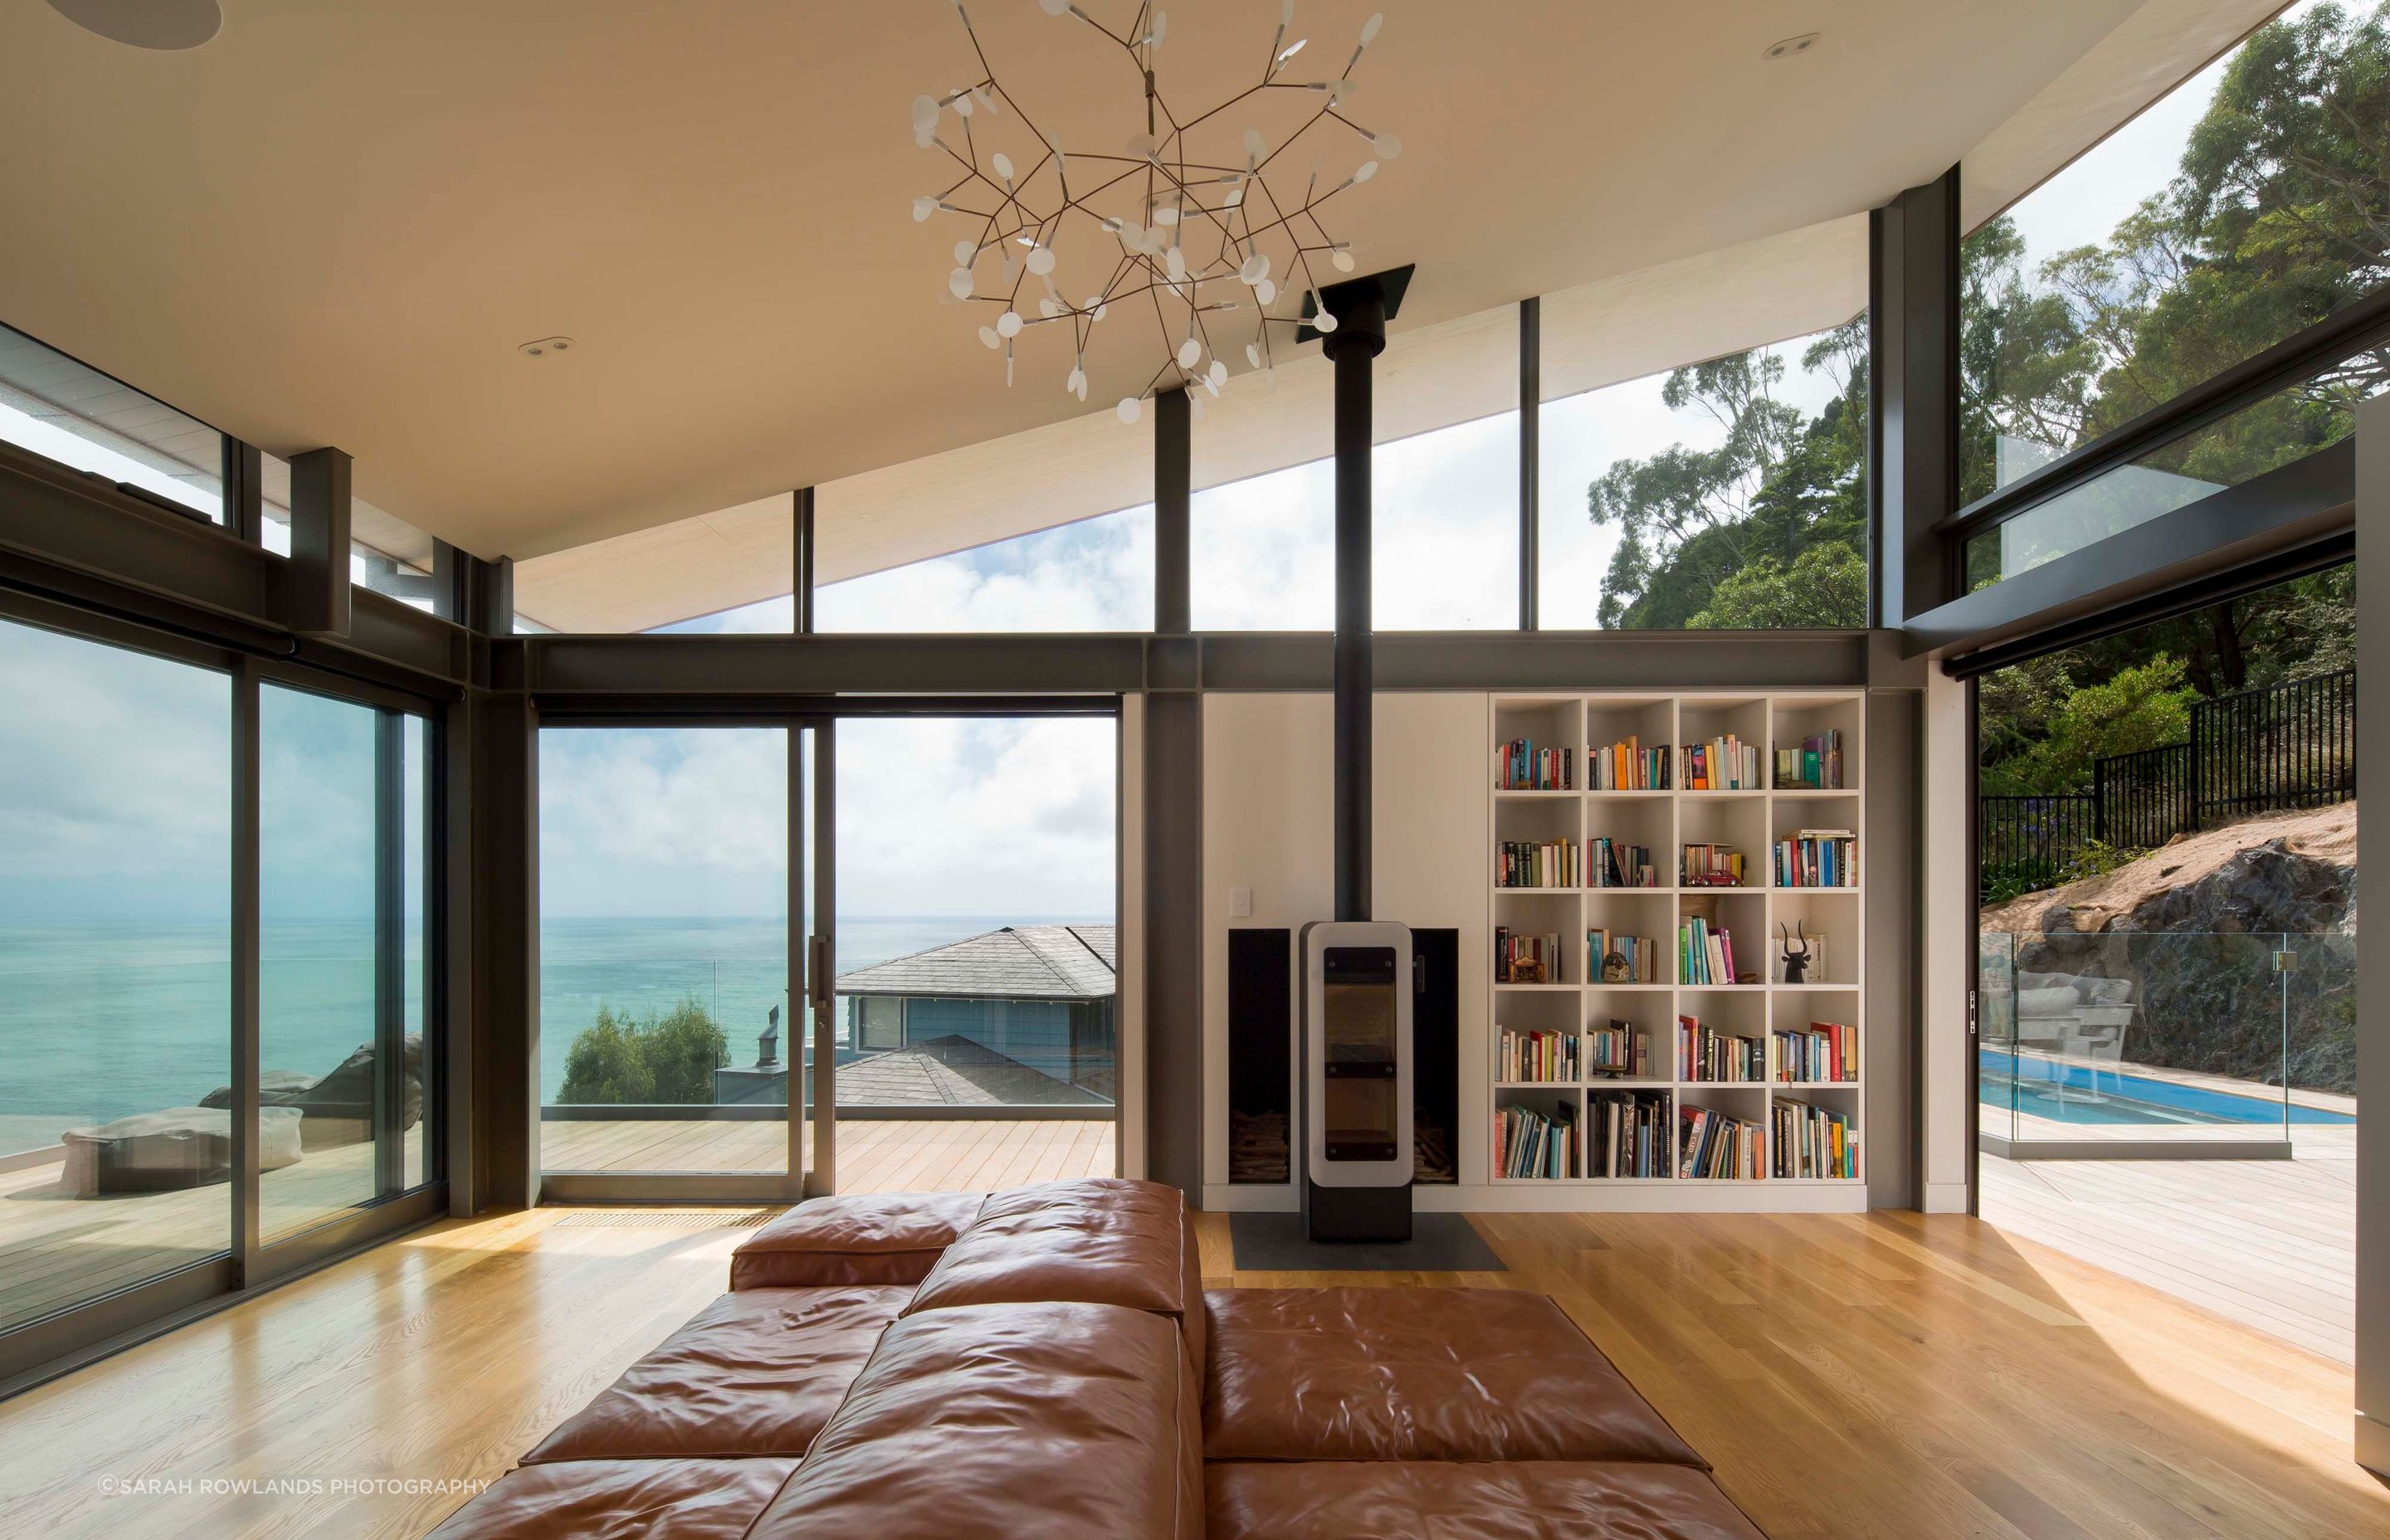 Looking north from the living room, which enjoys a double-aspect and elevated views to the reserve behind the house thanks to the raked ceiling and clerestory windows.